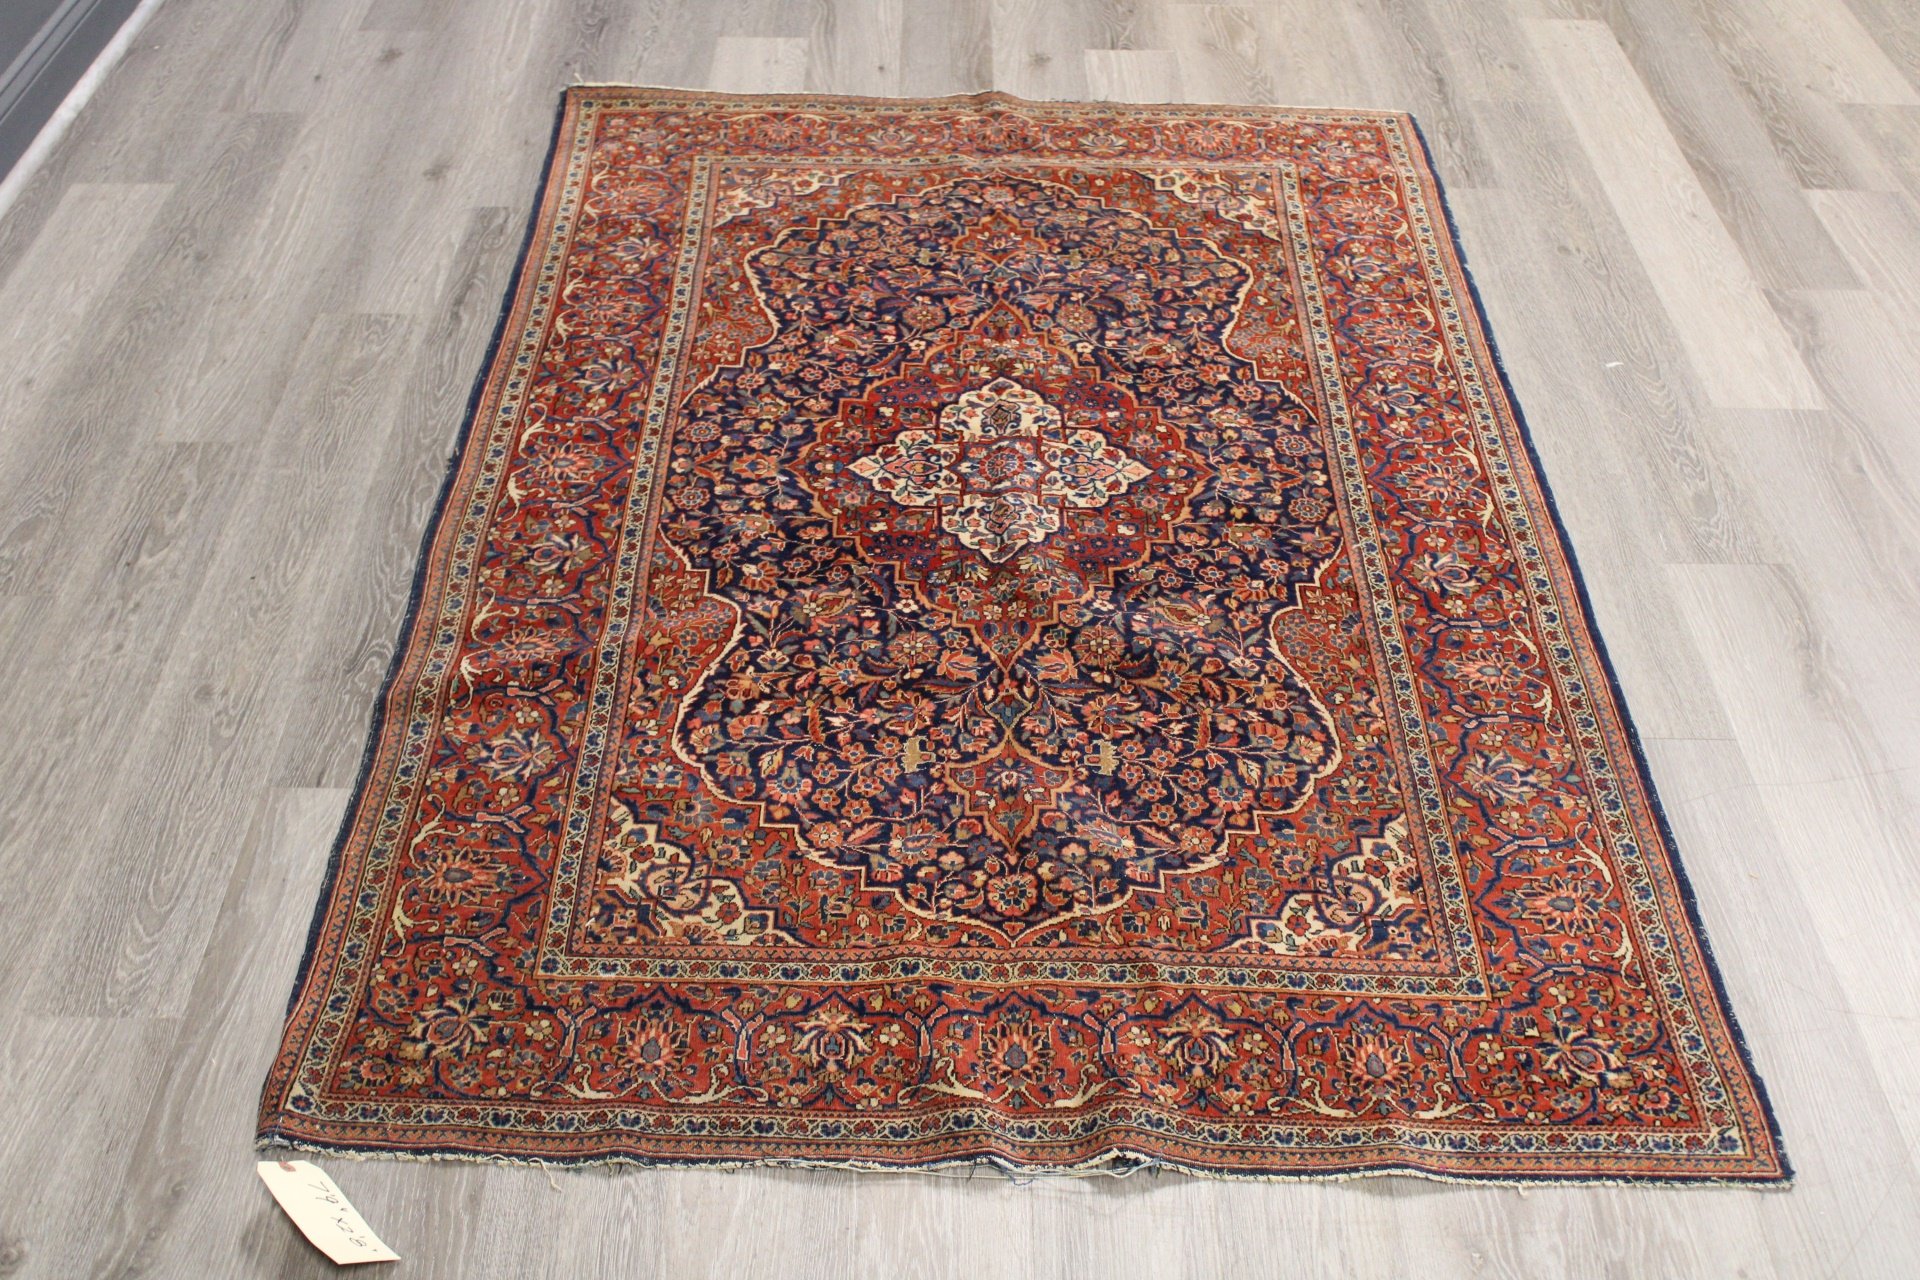 ANTIQUE AND FINELY HAND WOVEN CARPET  3b9da3